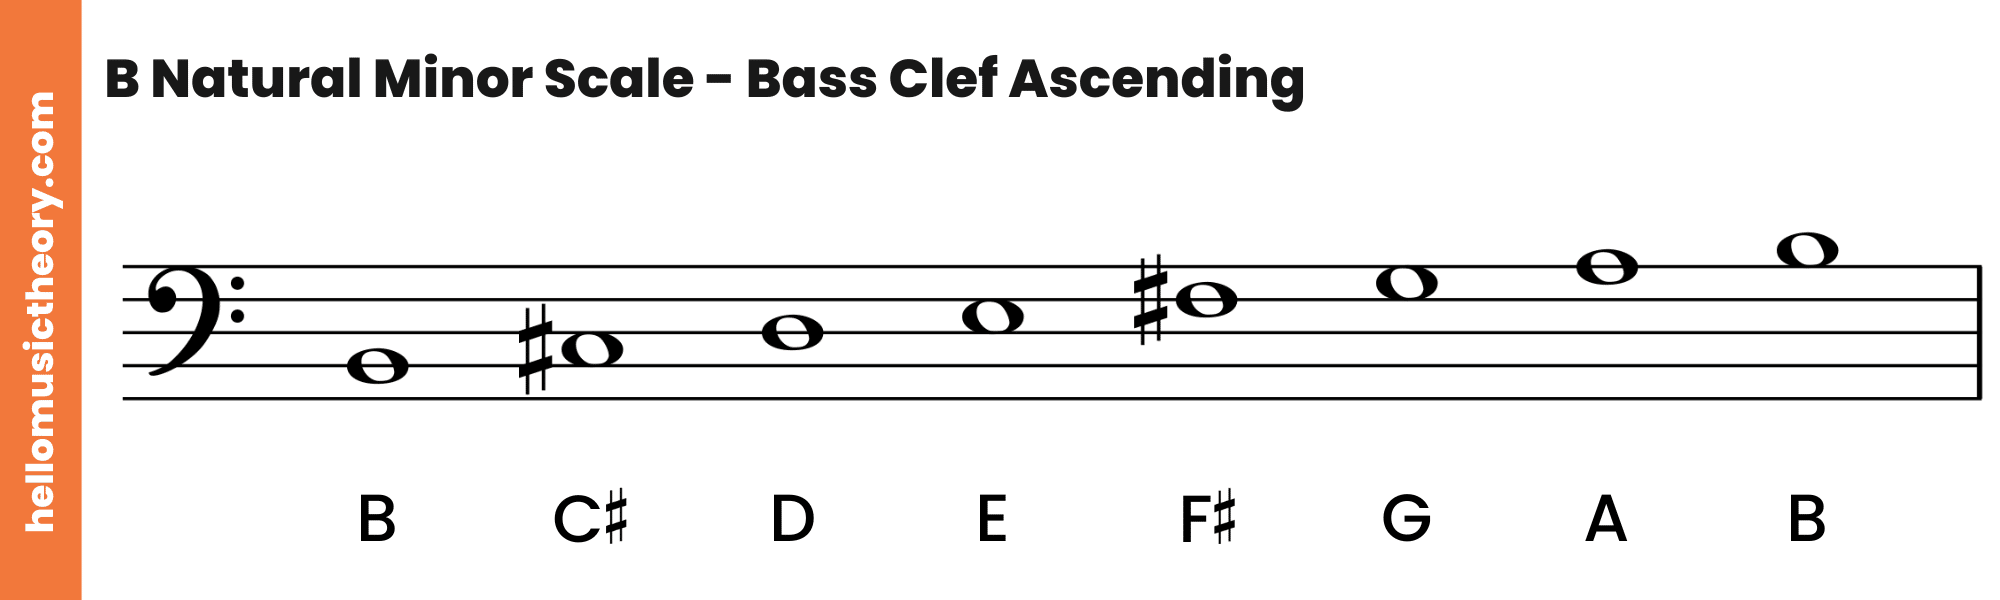 B Natural Minor Scale Bass Clef Ascending